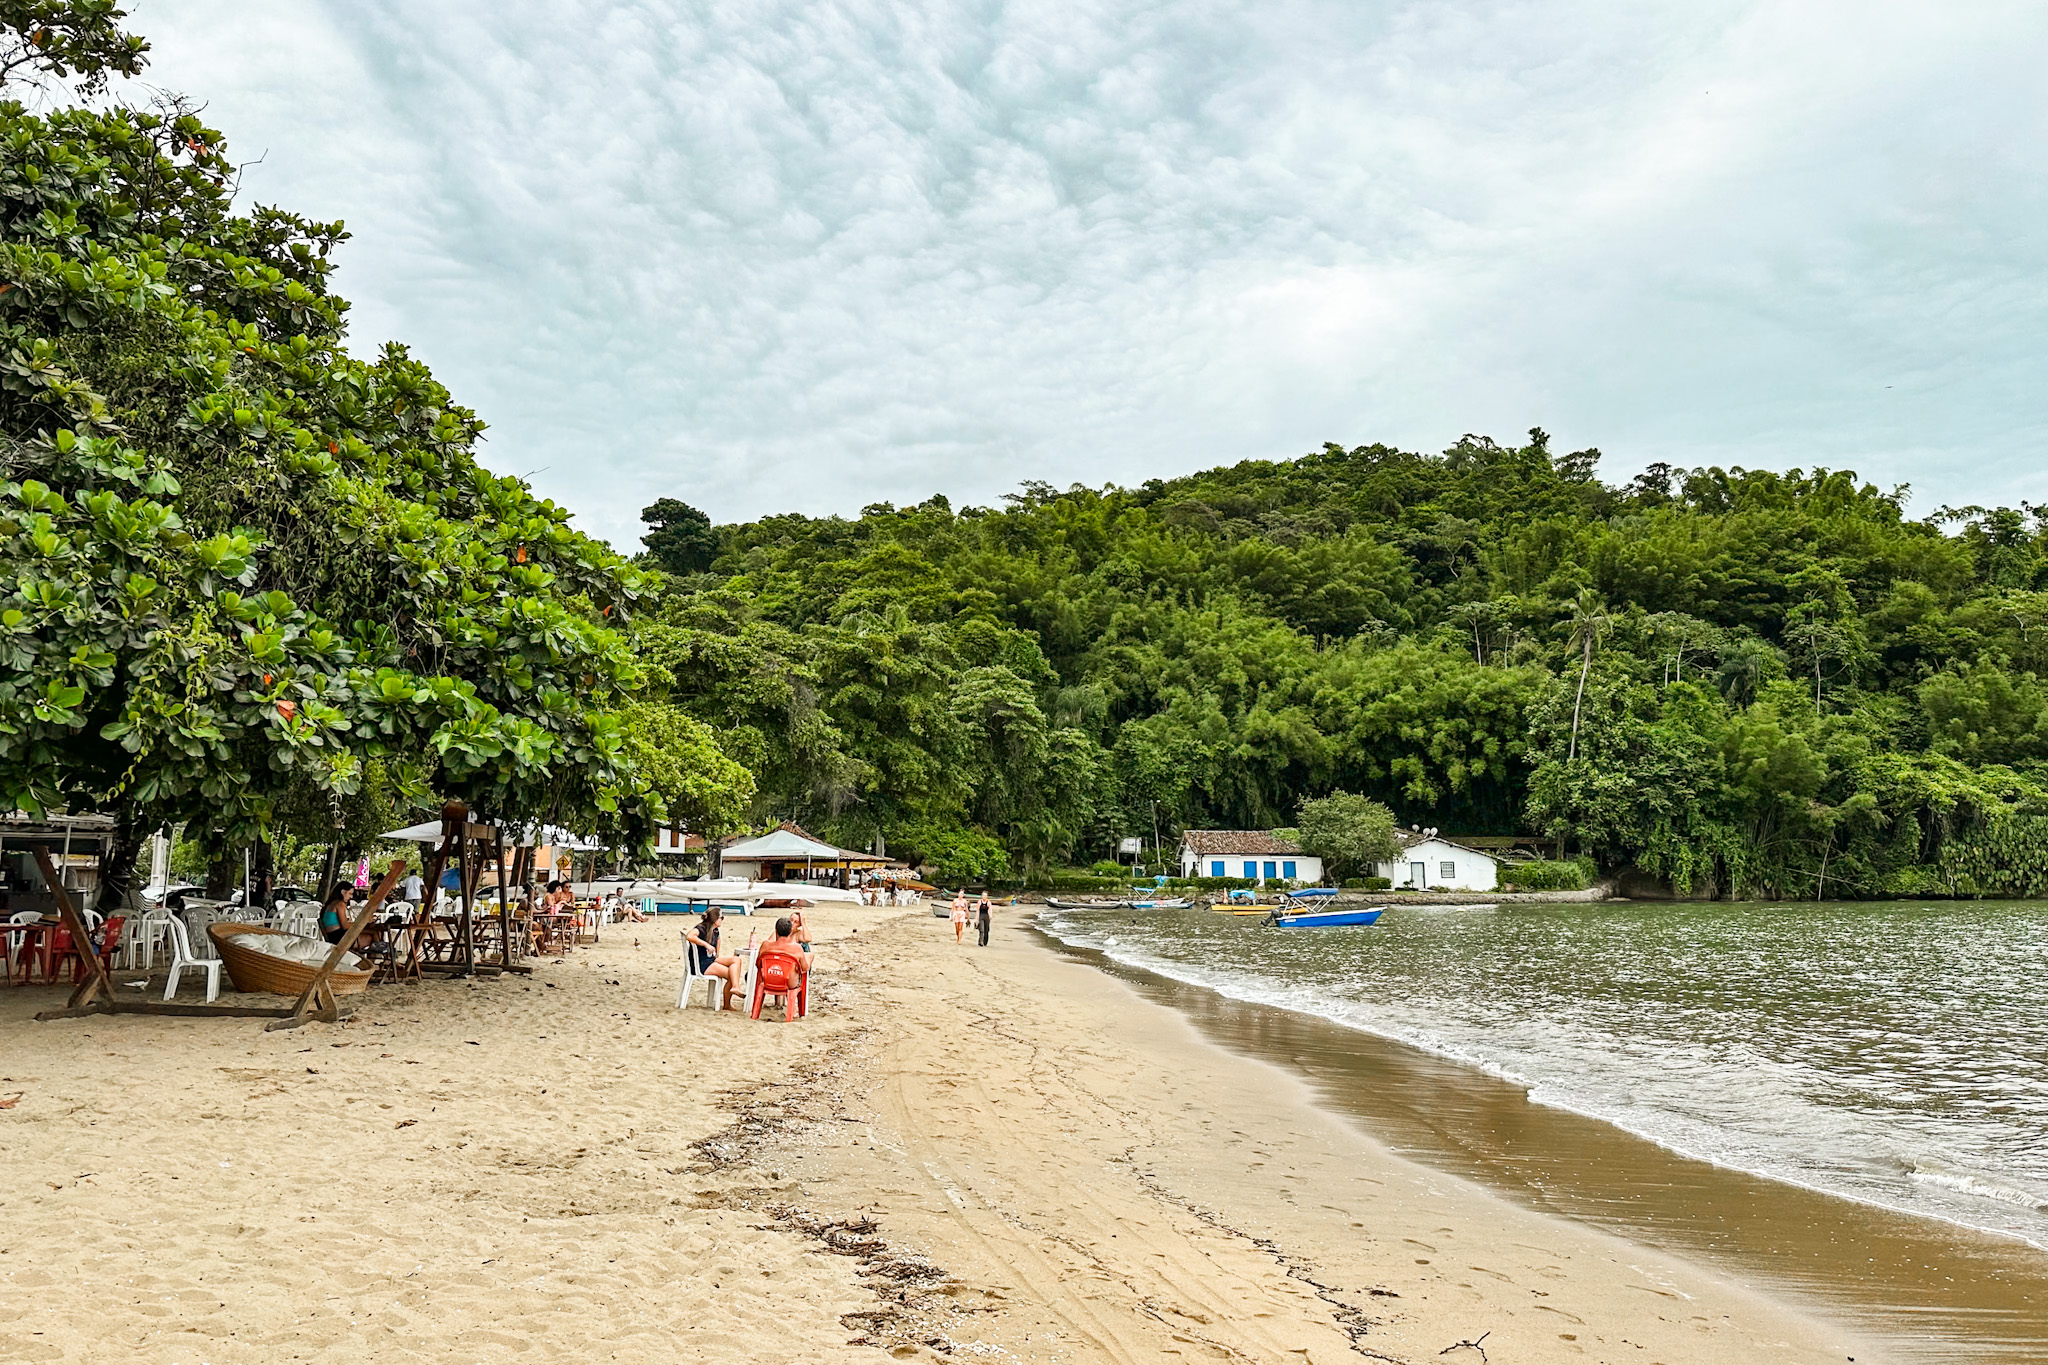 Best things to do in Paraty, Brazil: Kayak in the mangroves